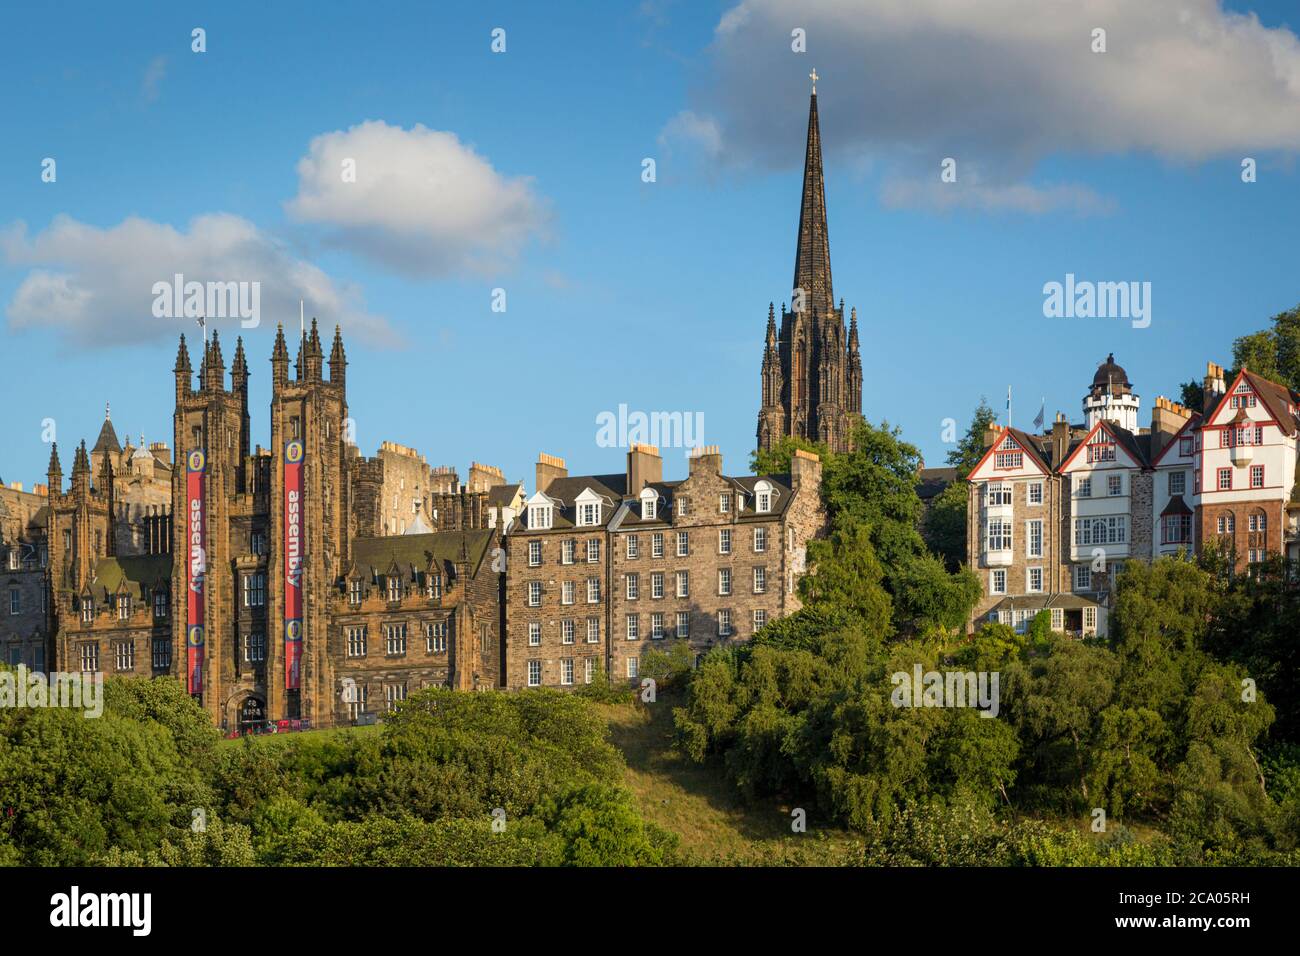 Church of Scotland and Tolbooth Church Towers rise above the buildings of old Edinburgh, Scotland, UK Stock Photo